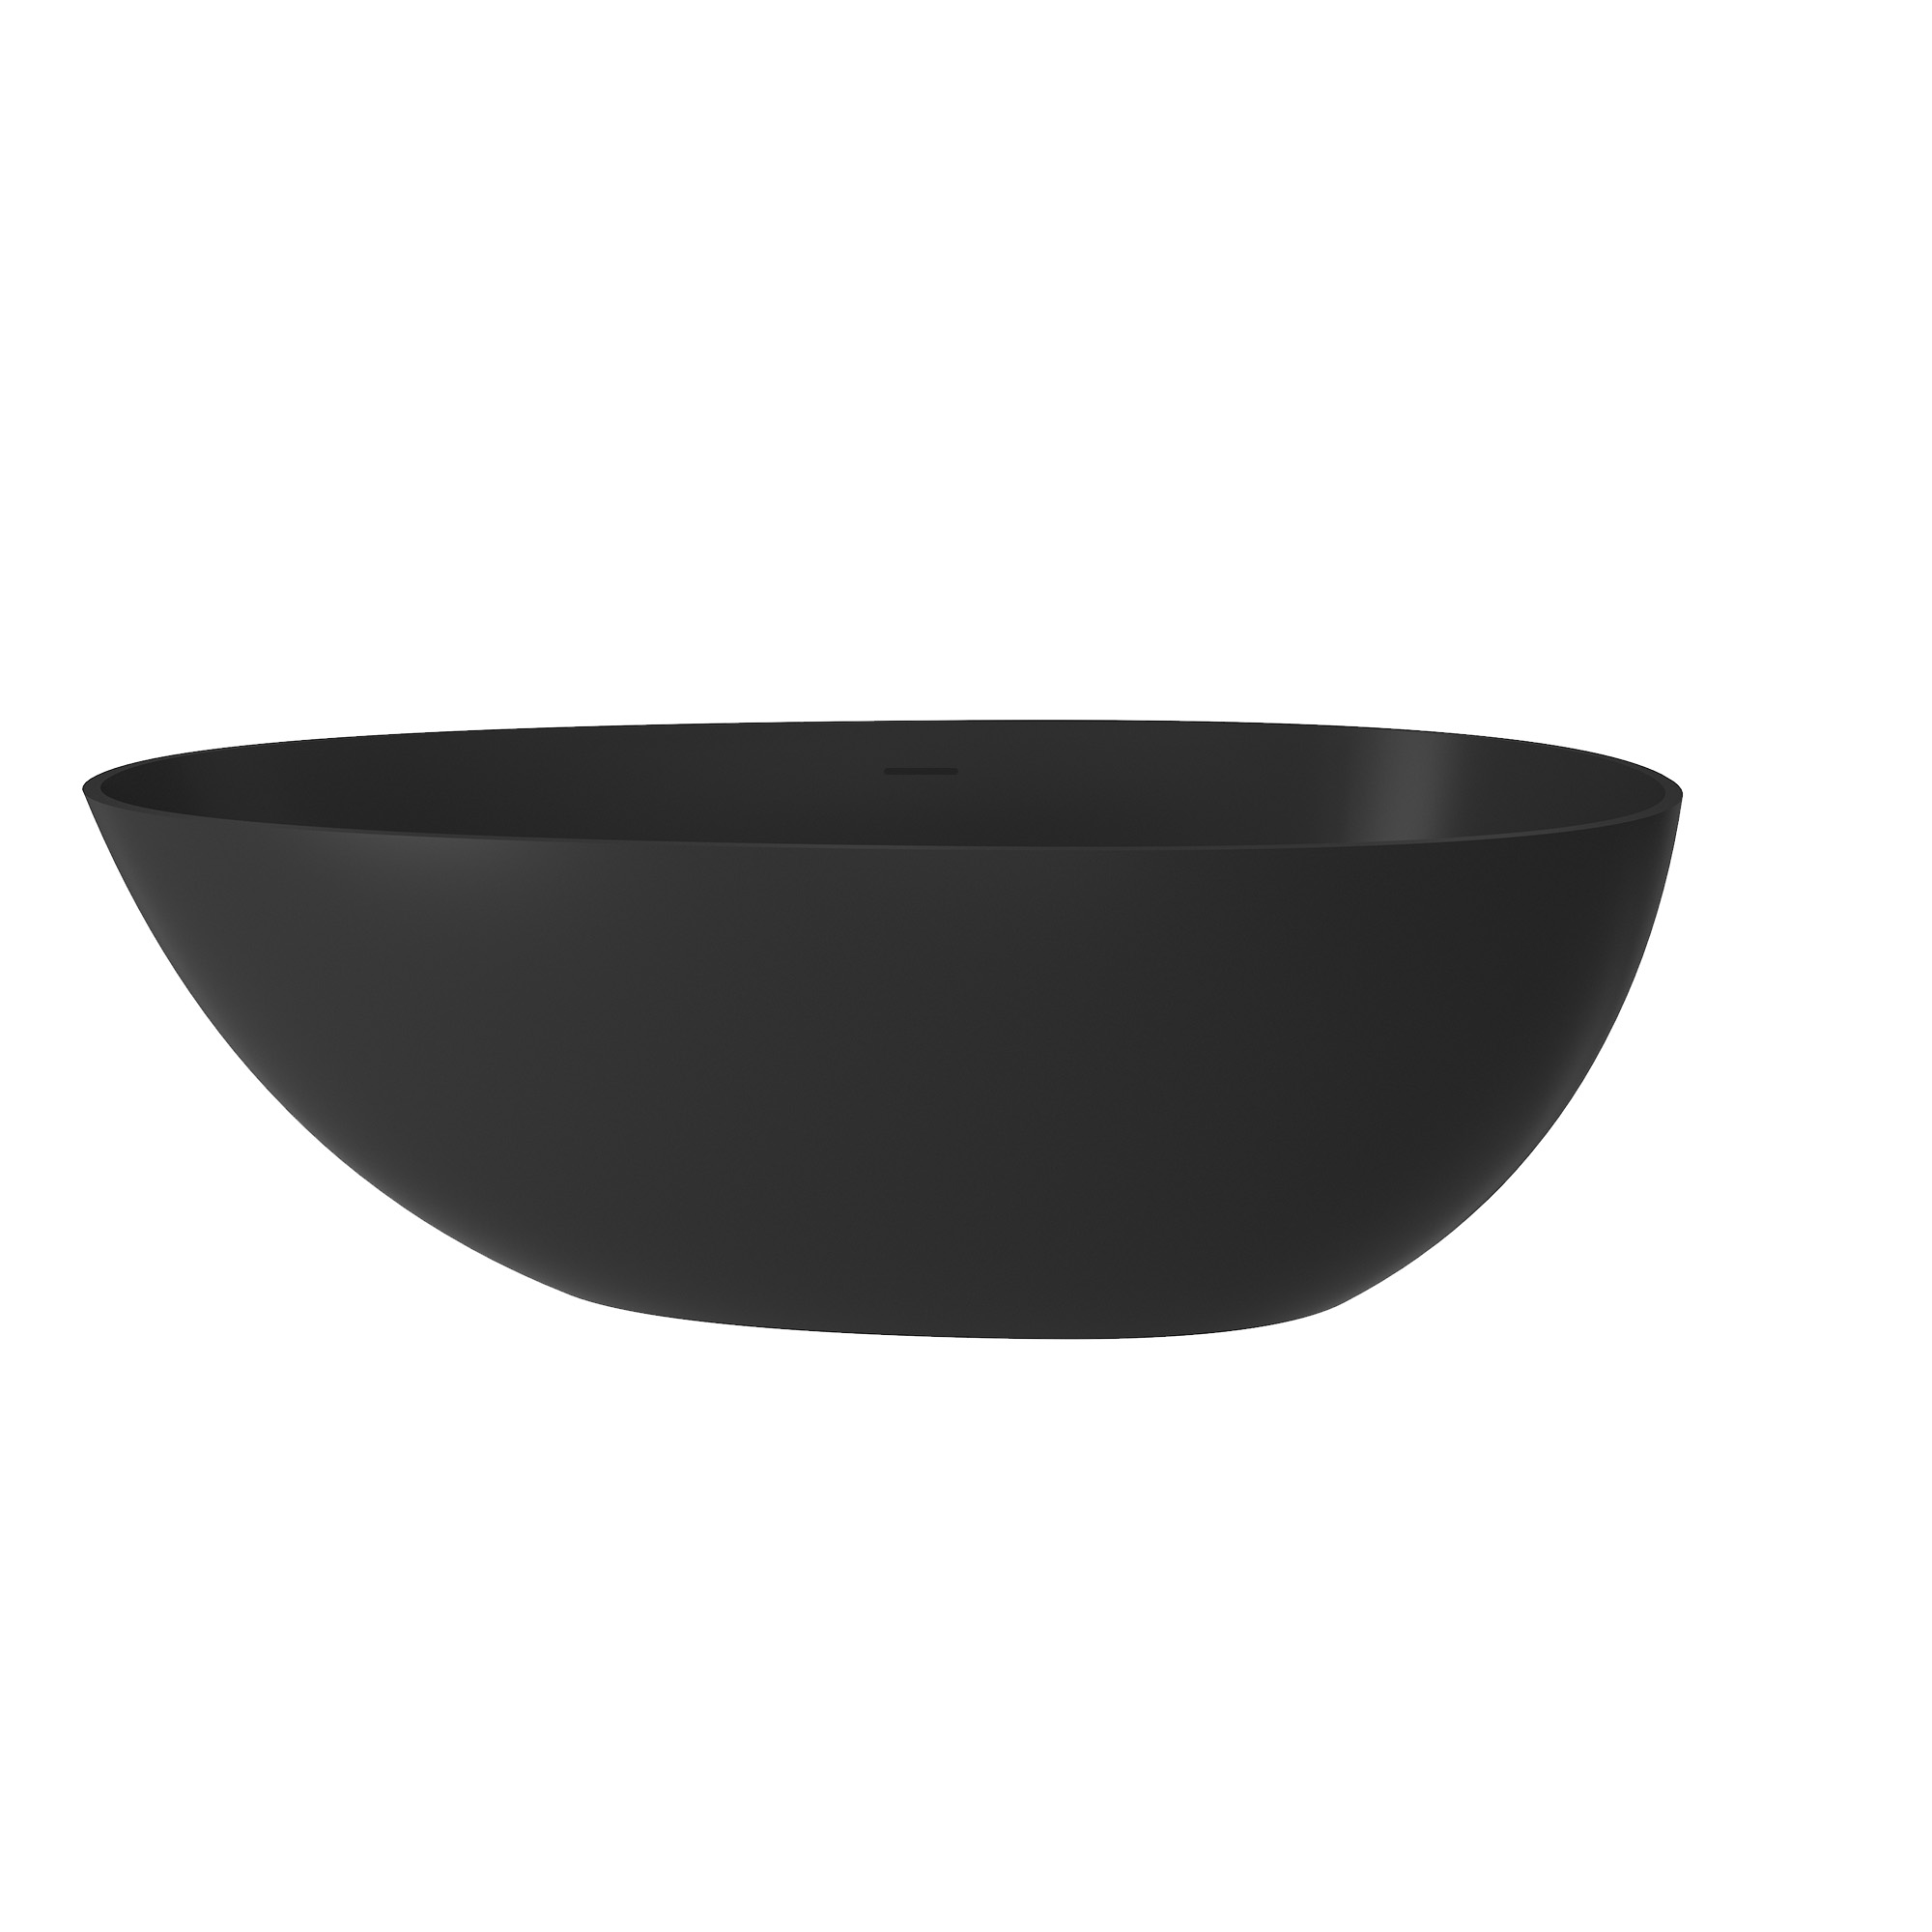 67" Solid Surface Bathtubs, Egg Shell Shapes Stone Resin Freestanding Tubs, Contemporary Oval Soaking Tub with Overflow and Center Drain, Matte Black Color